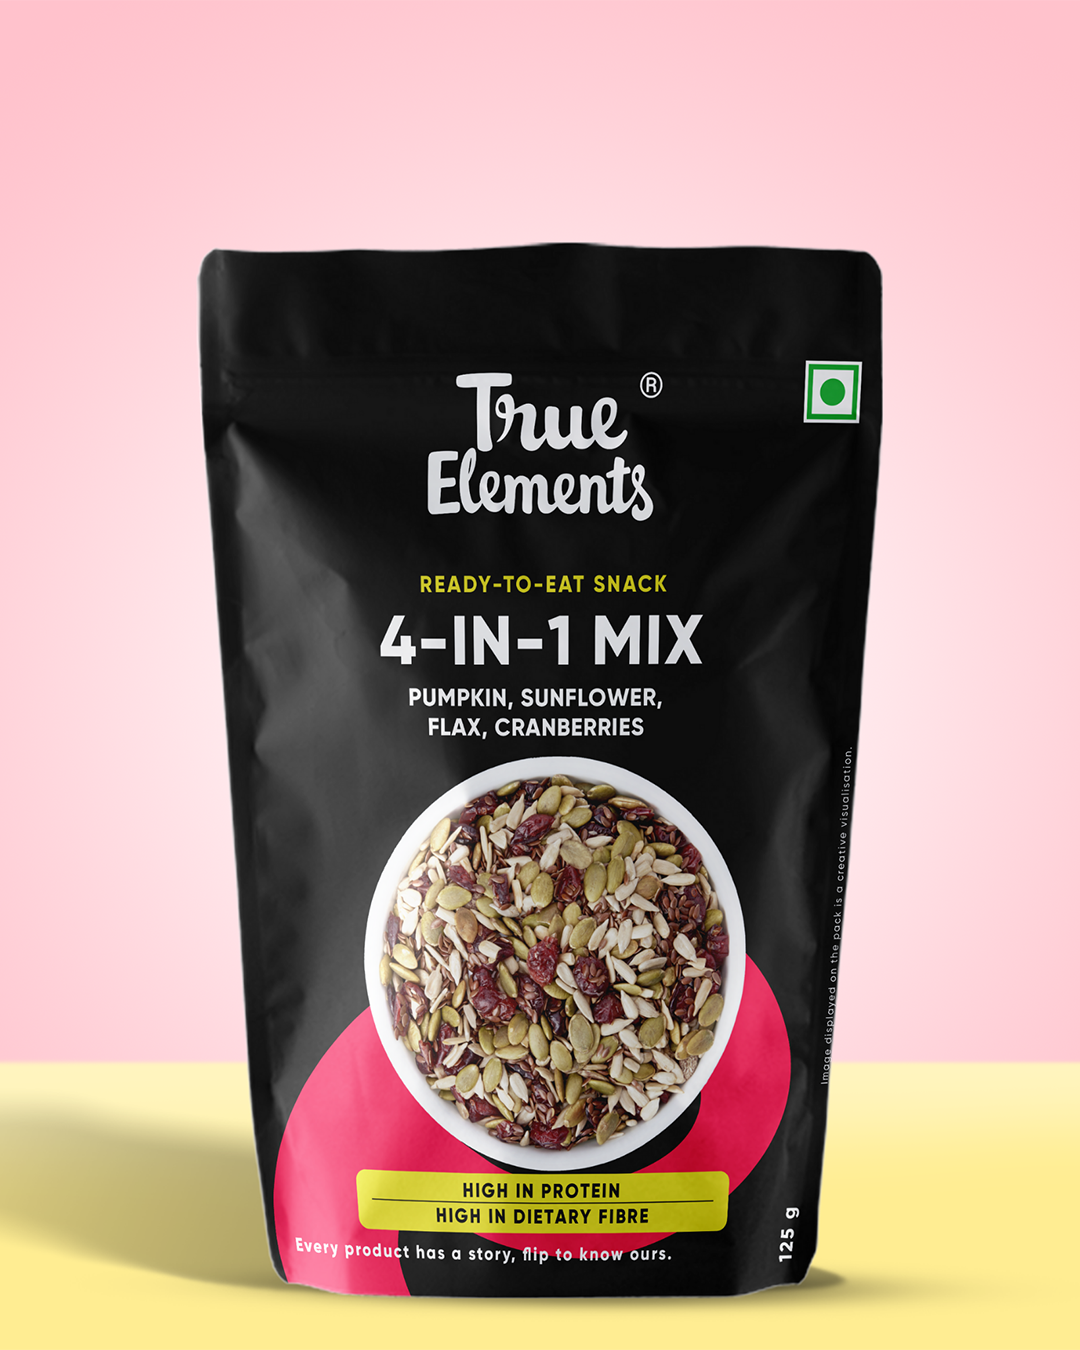 4 in 1 mix with pumpkin, sunflower, flax and dried cranberries in 125g pouch